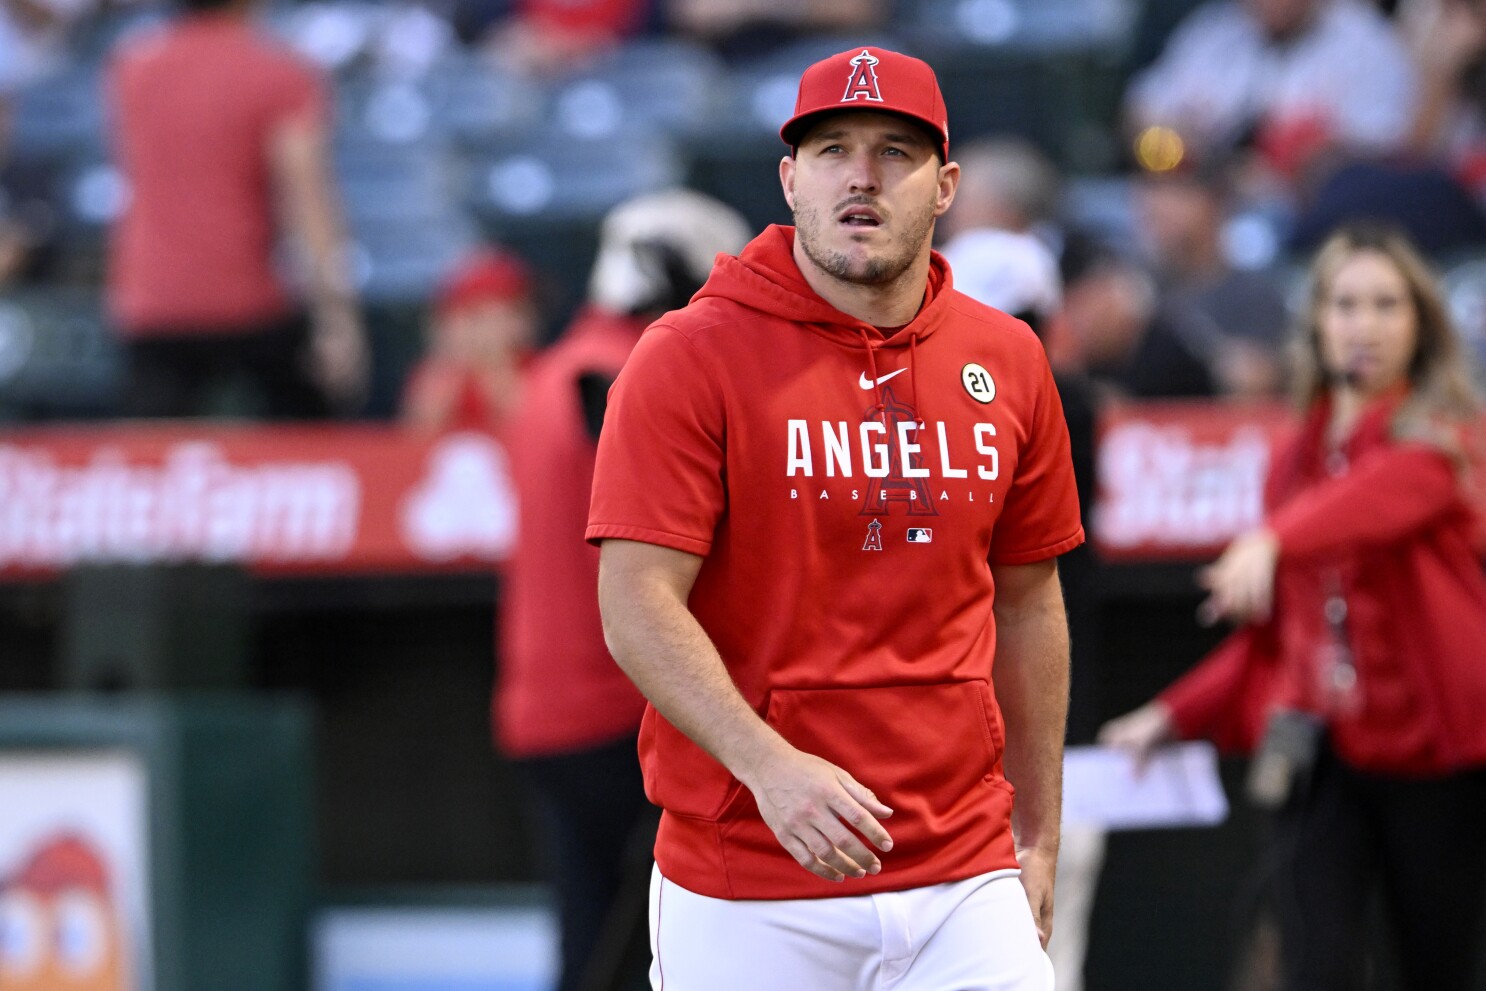 Injured Angels star Mike Trout accompanies team on final road trip